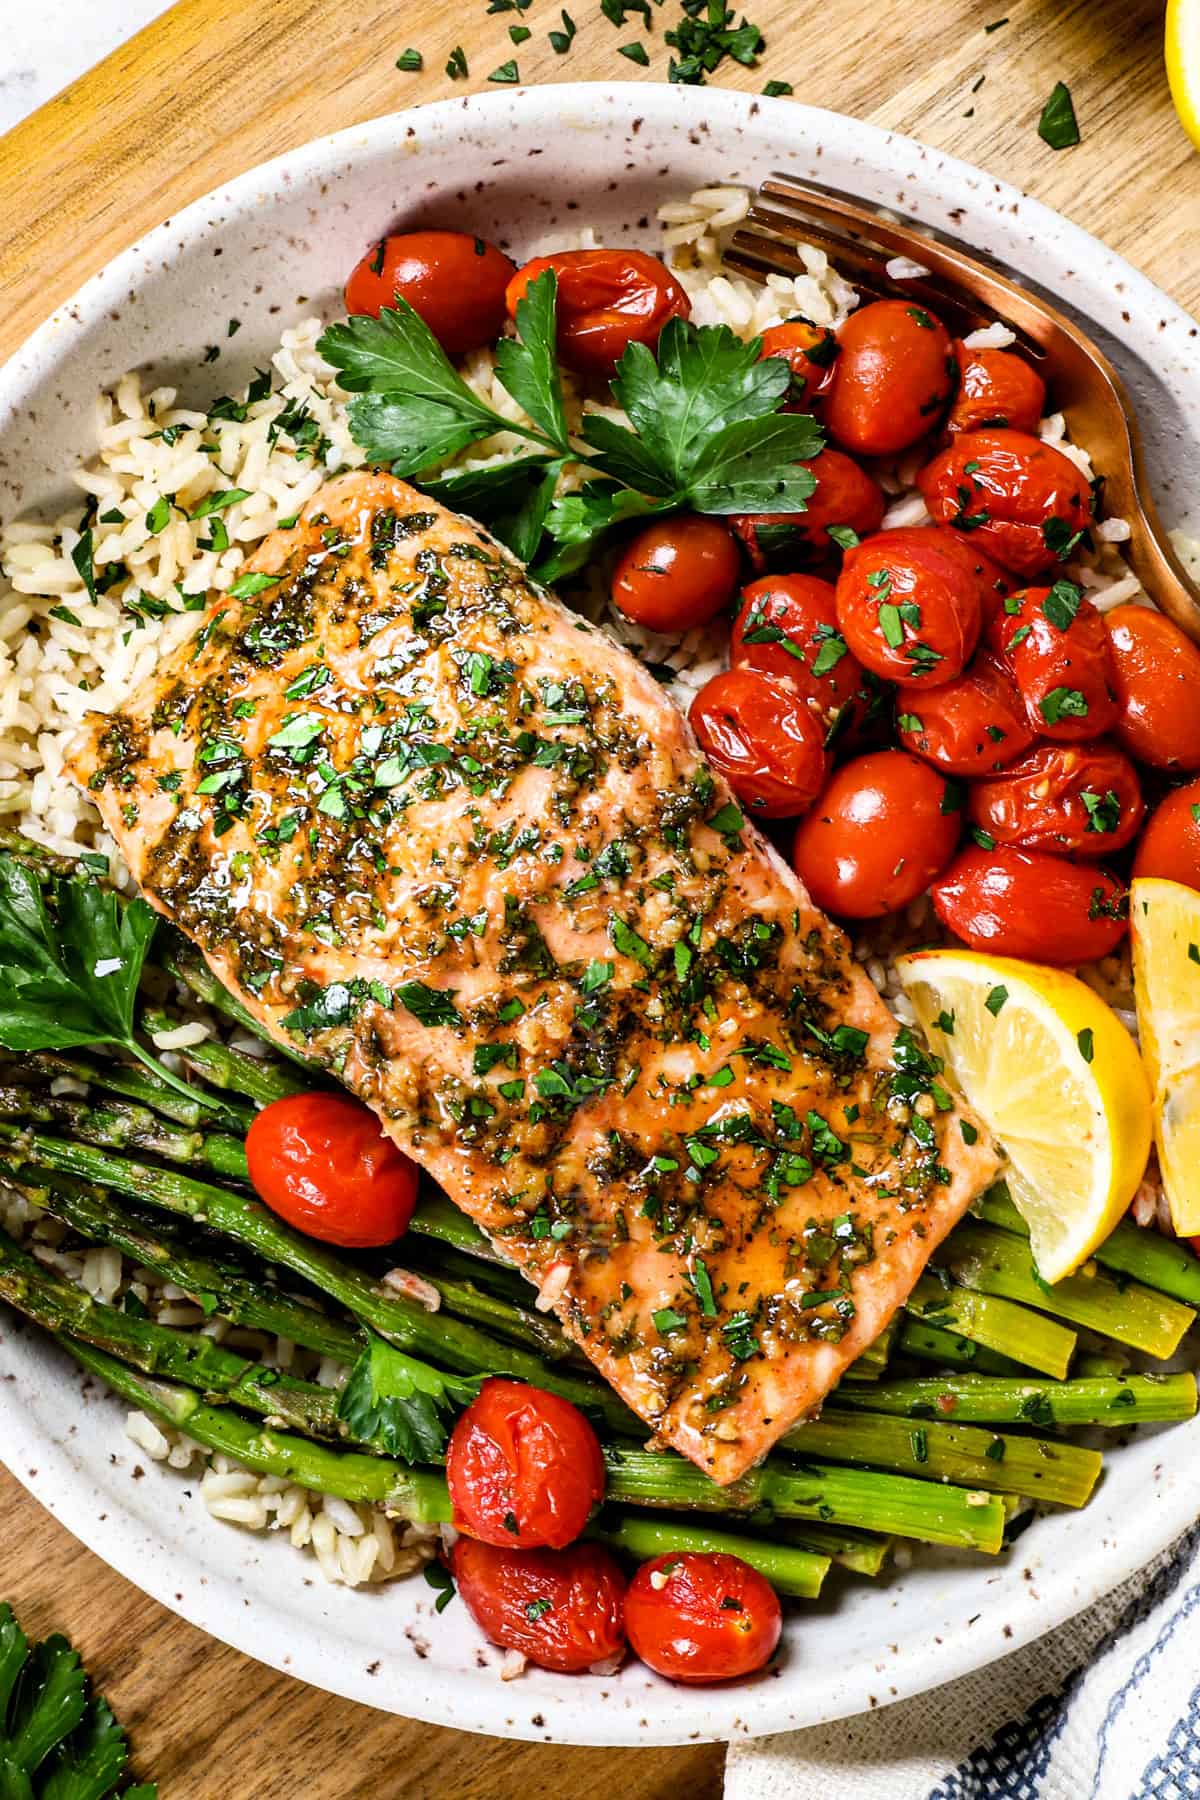 top view showing how to serve baked salmon in oven on a plate with rice, tomatoes and asparagus 